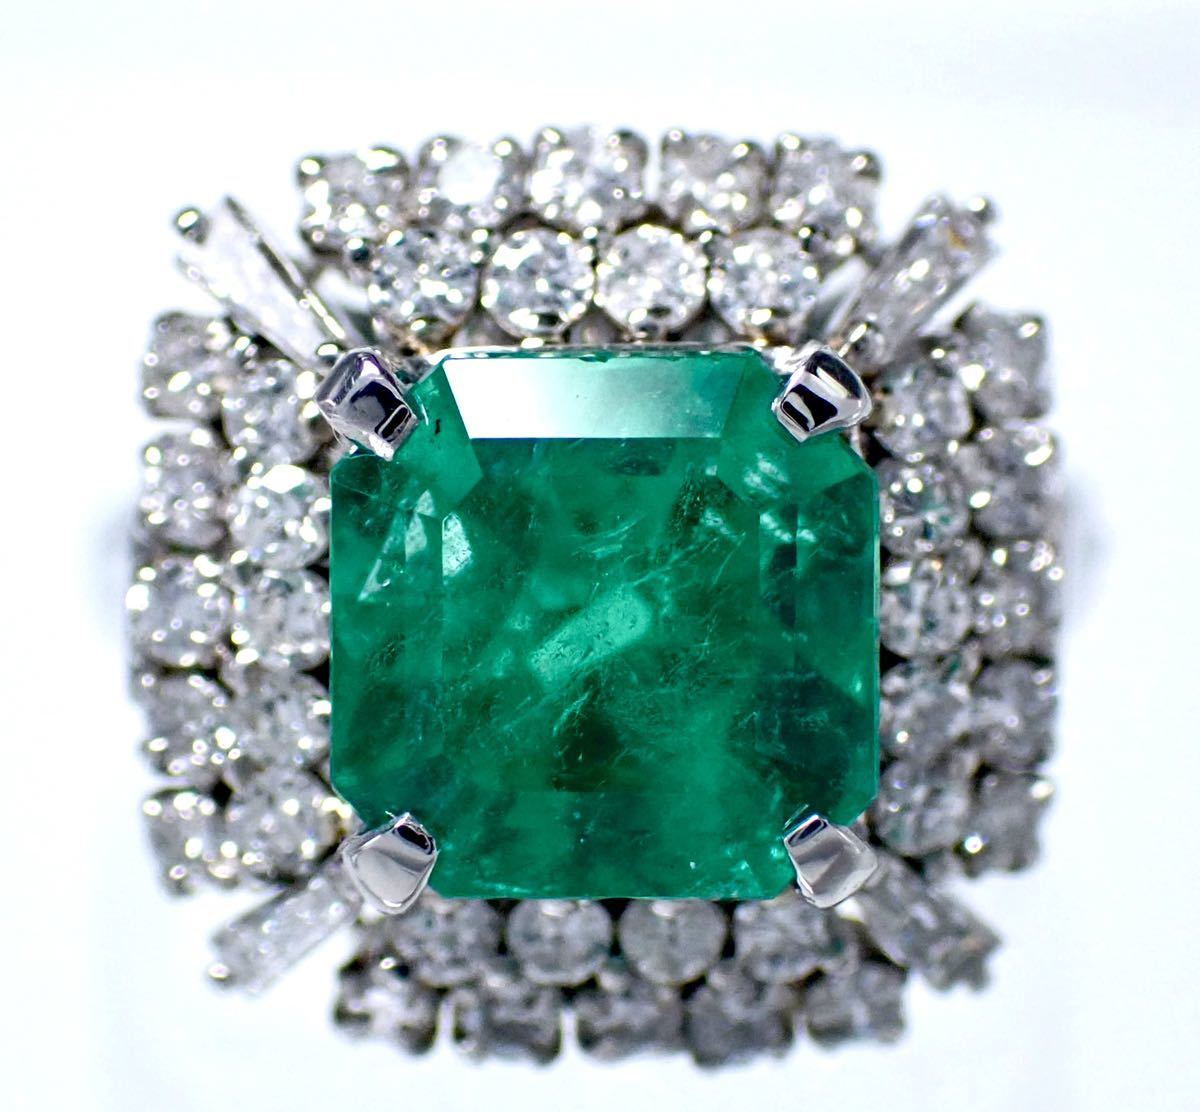  large grain natural emerald 3.39ct diamond 0.73ct Pt900 platinum ring ring Colombia production CGL. another document ring 